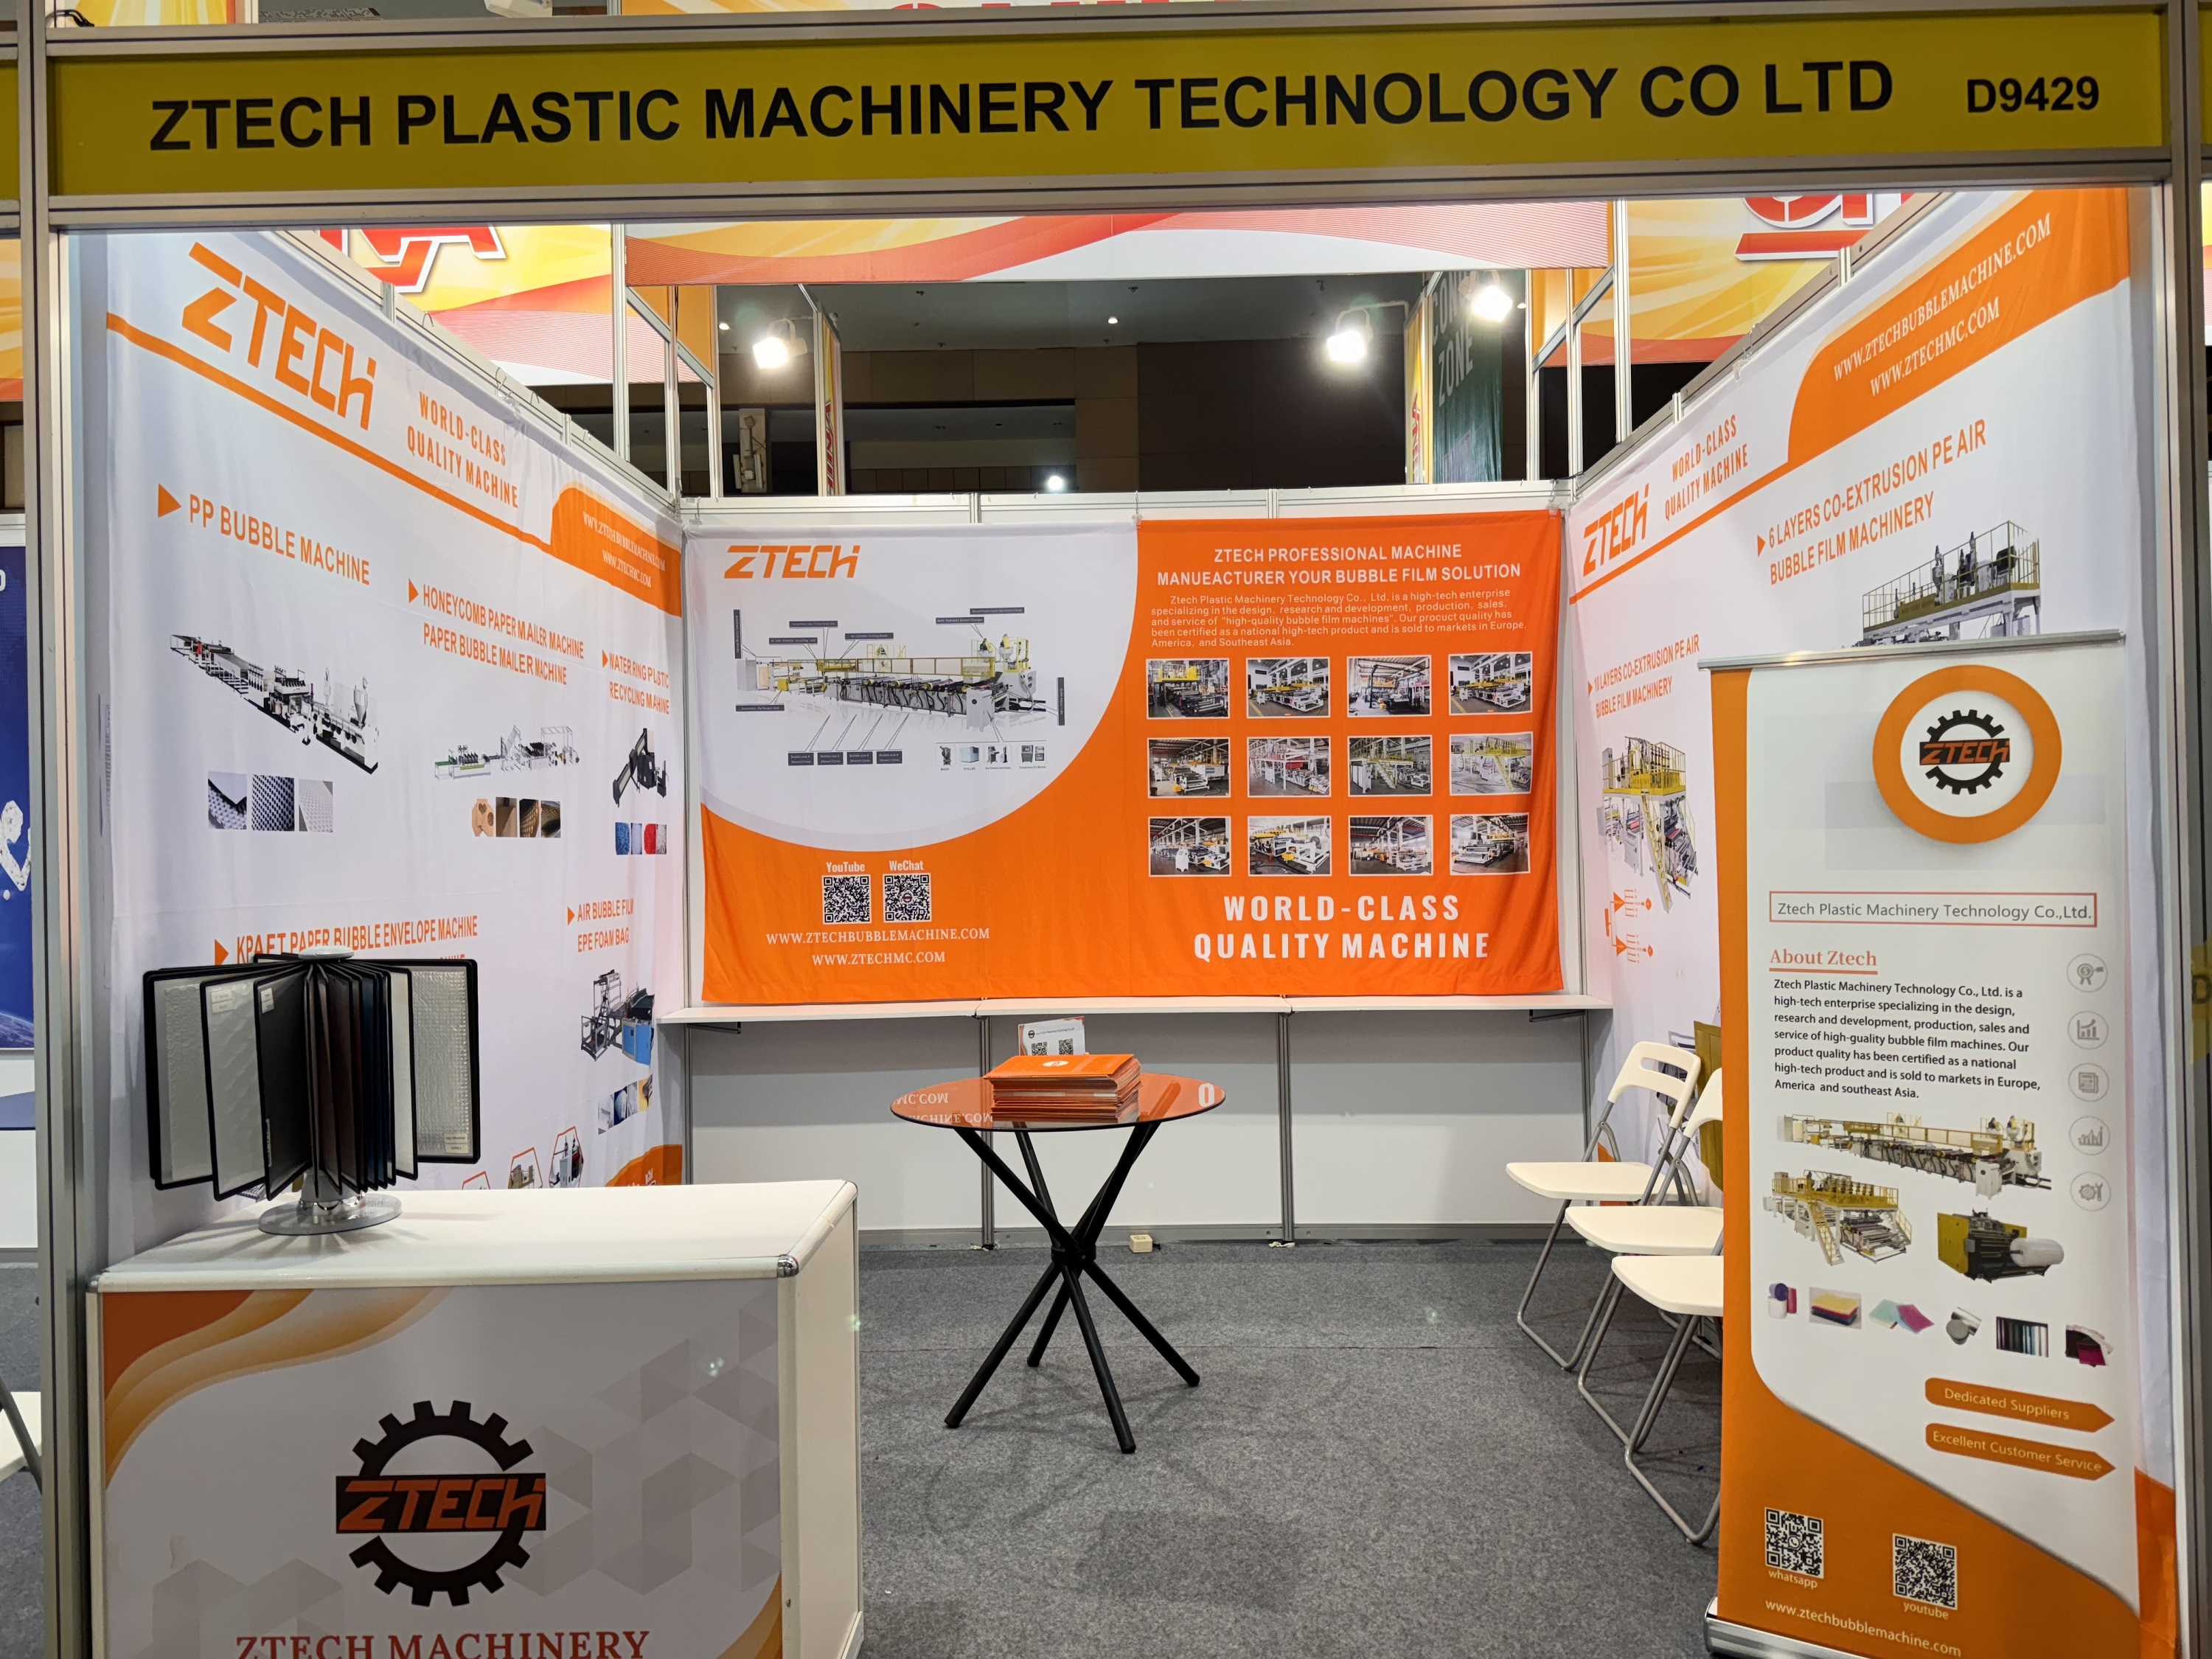 The 34th International Plastics & Rubber Machinery, Processing & Materials Exhibition of Indonesia